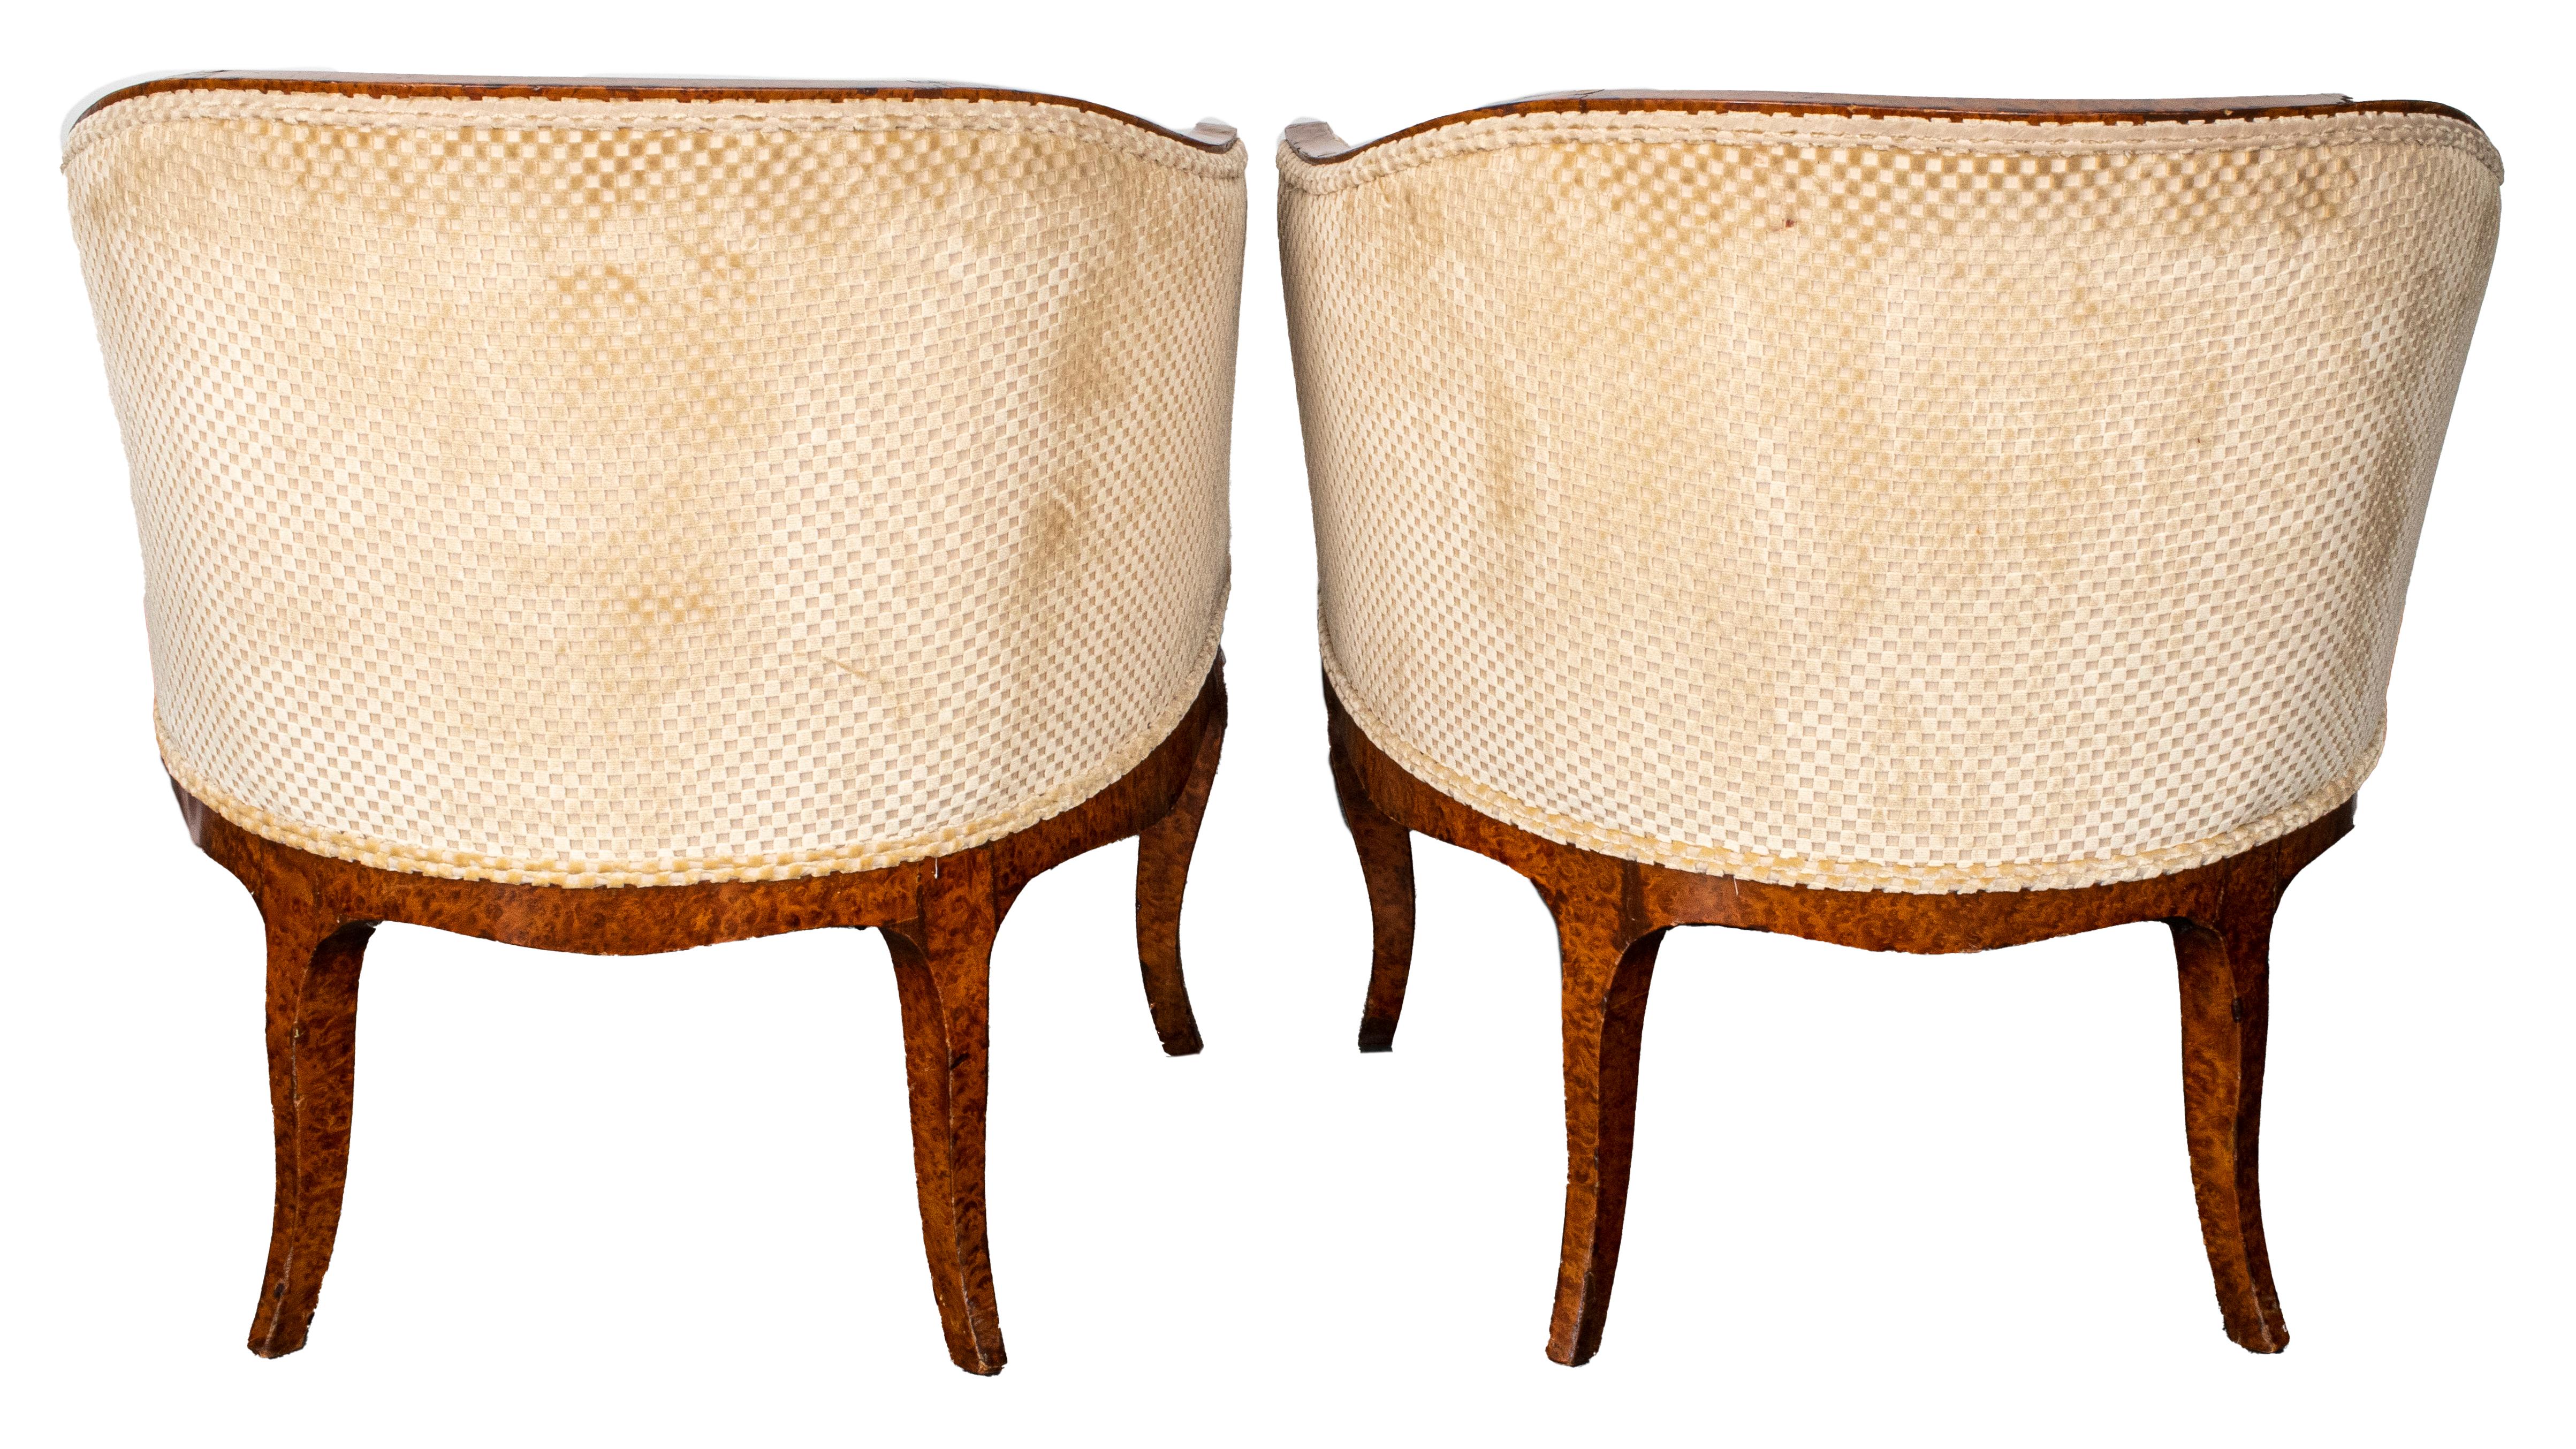 Early 20th Century Pair of French Burl Wood Veneer Lounge Chairs